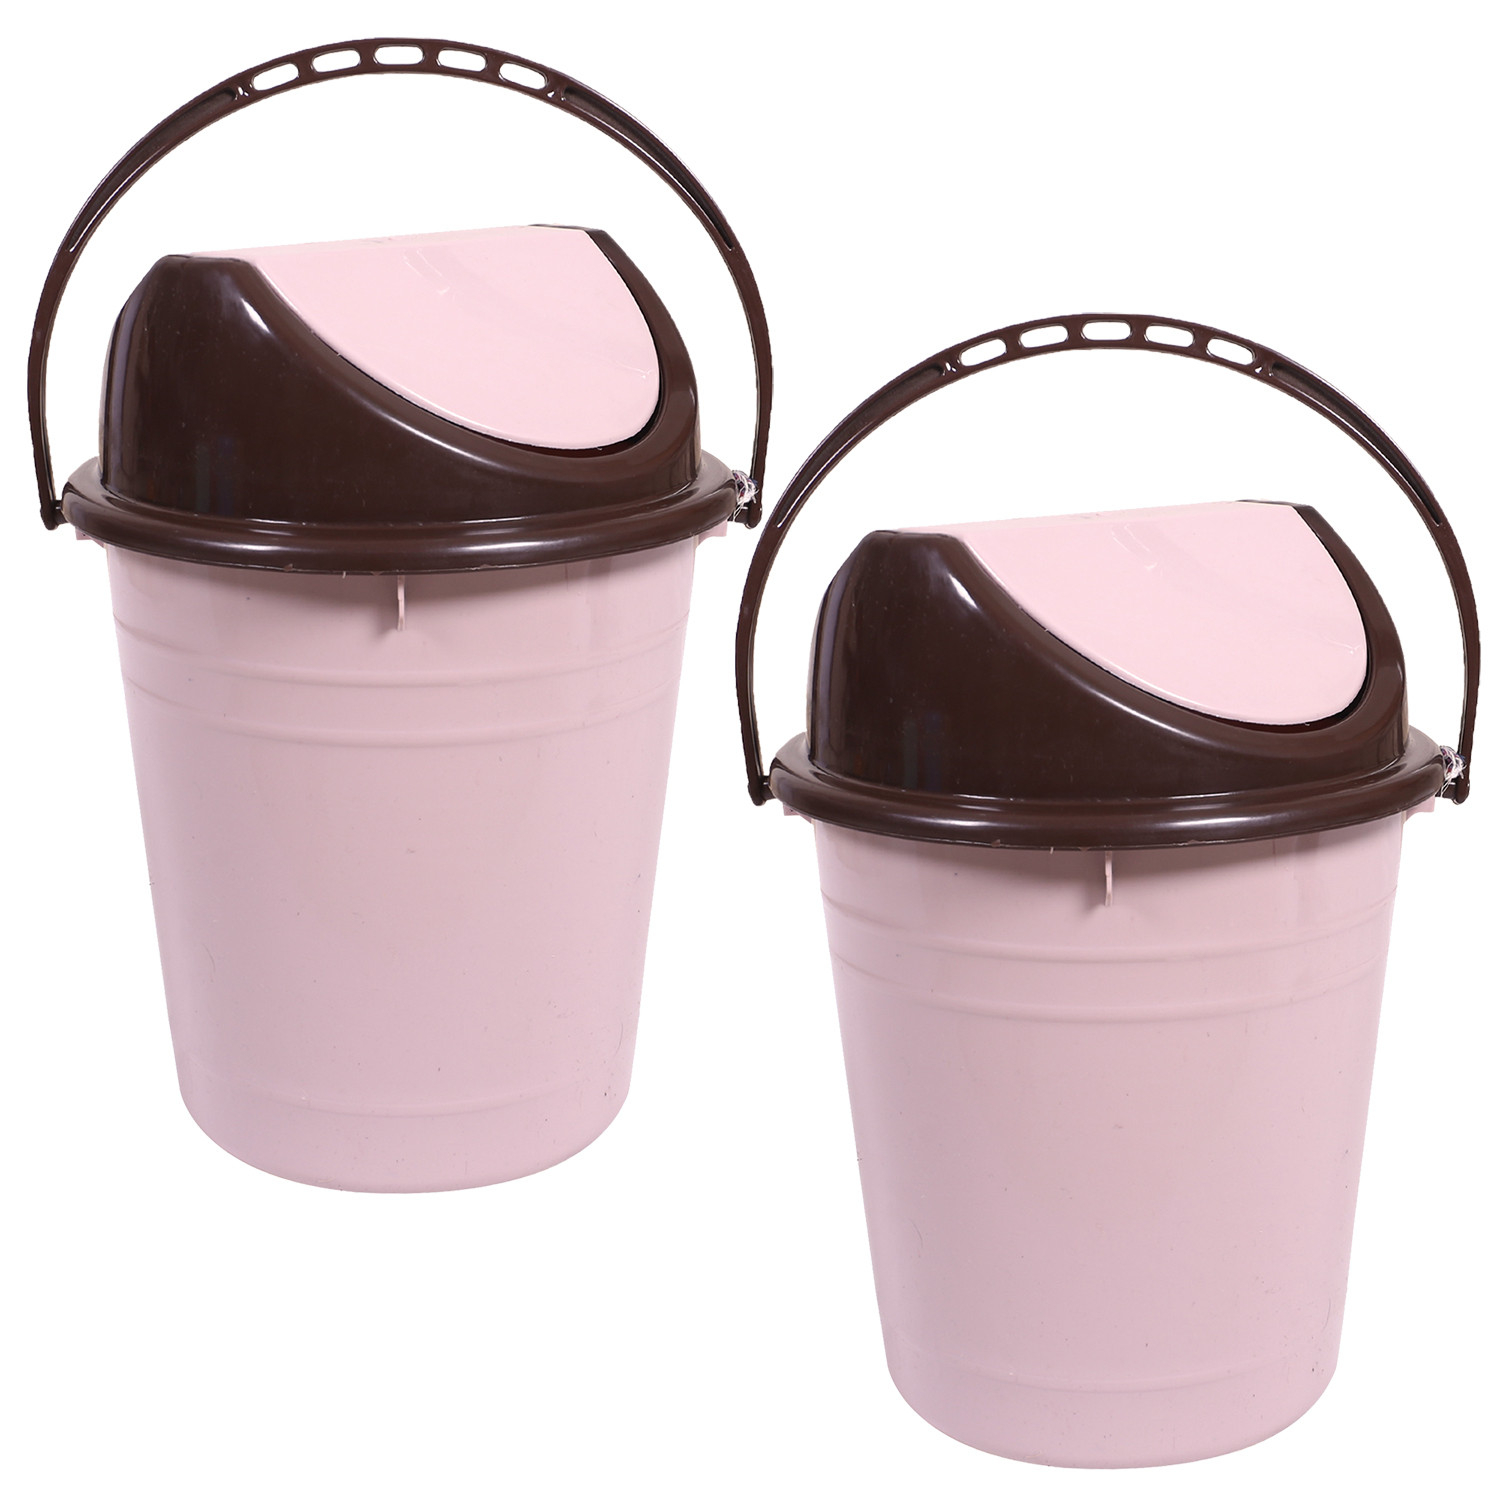 Kuber Industries Plastic Dustbin with Swinging Lid|Portable Garbage Basket & Round Trash Can for Home,Kitchen,Office,College,10 Ltr (Light Pink)